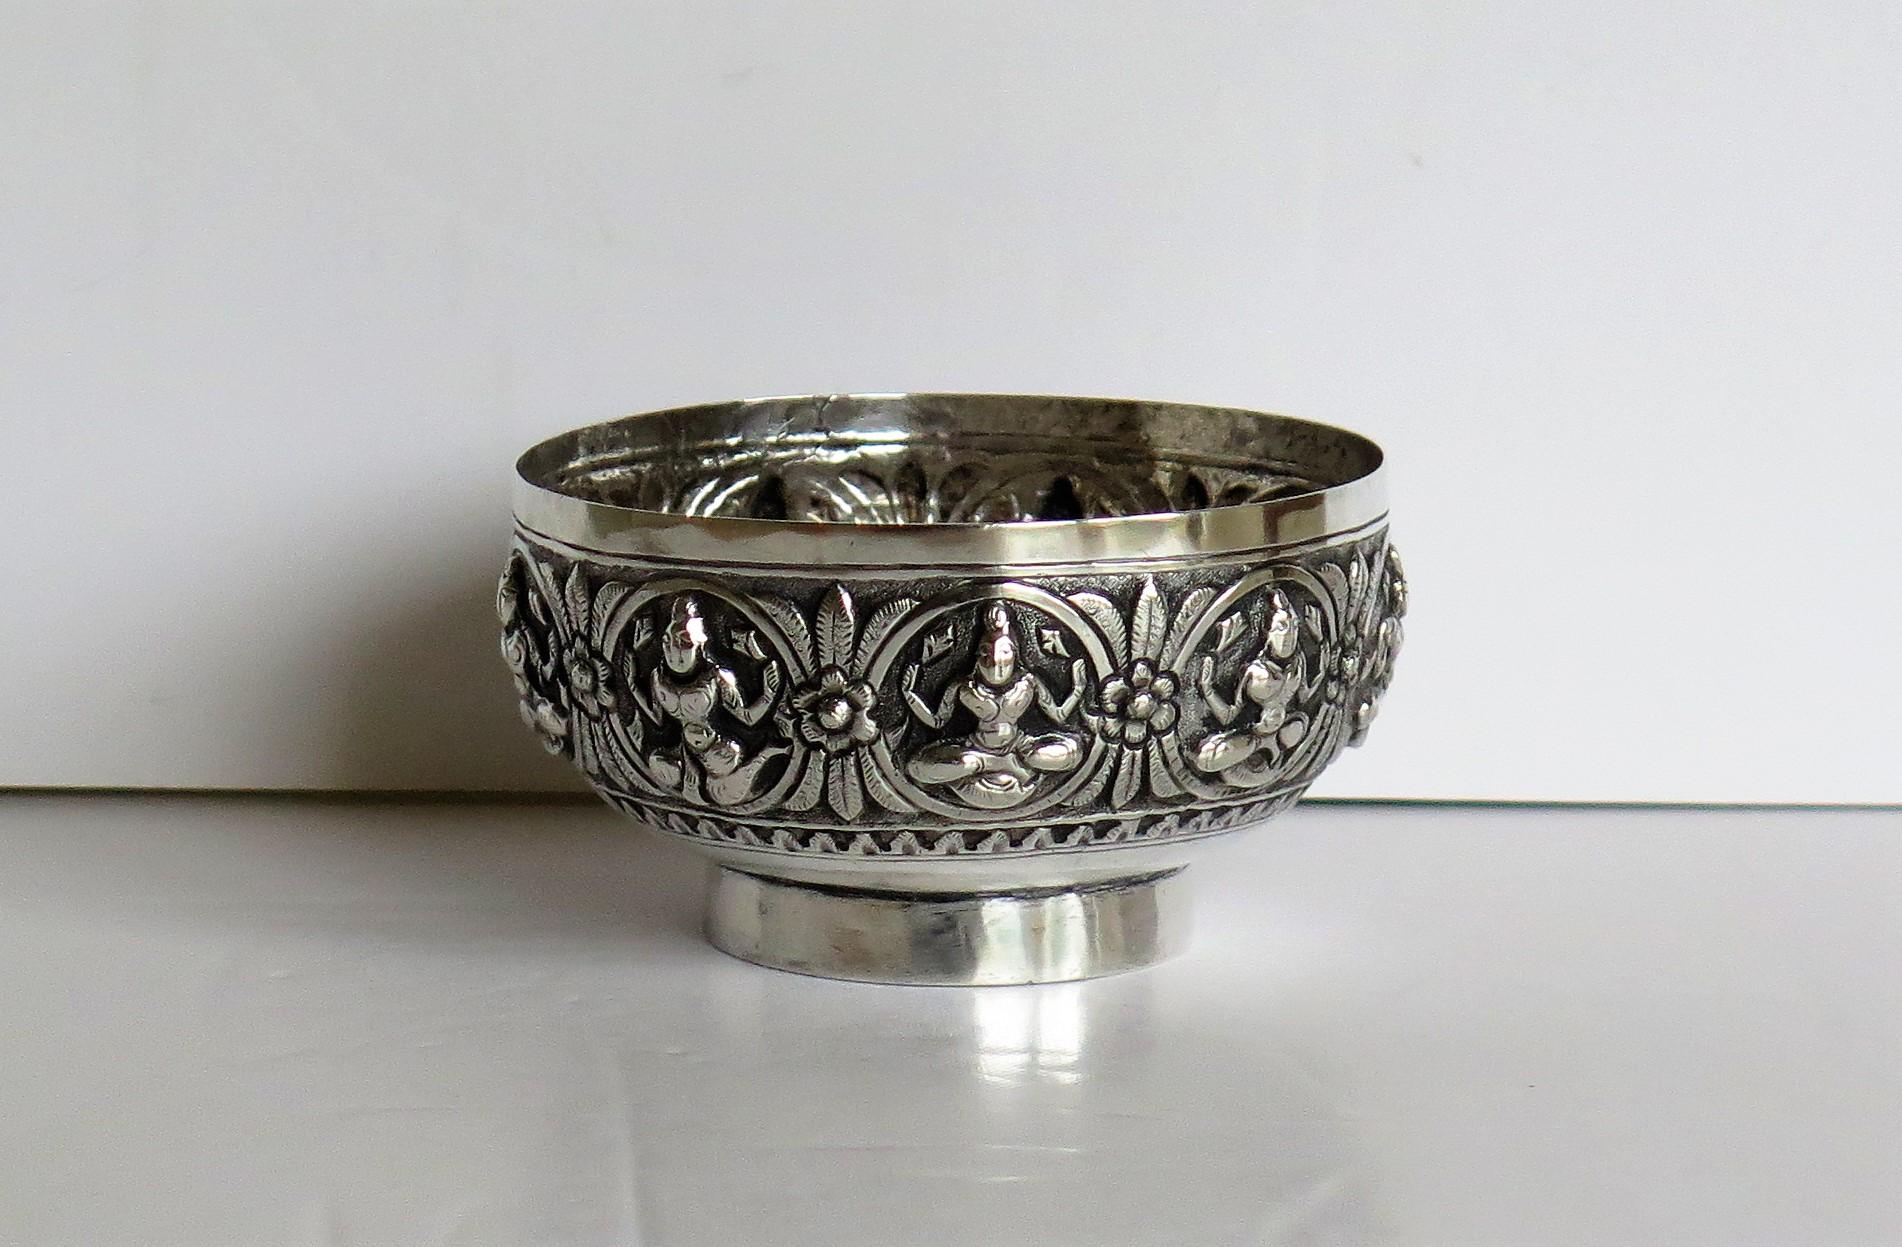 This is a solid silver Anglo-Indian bowl decorated with seated Dieties and made in India in the late 19th century, circa 1880.

The small circular bowl is made of solid silver and has a low foot.

The bowl has been beautifully hand chased with